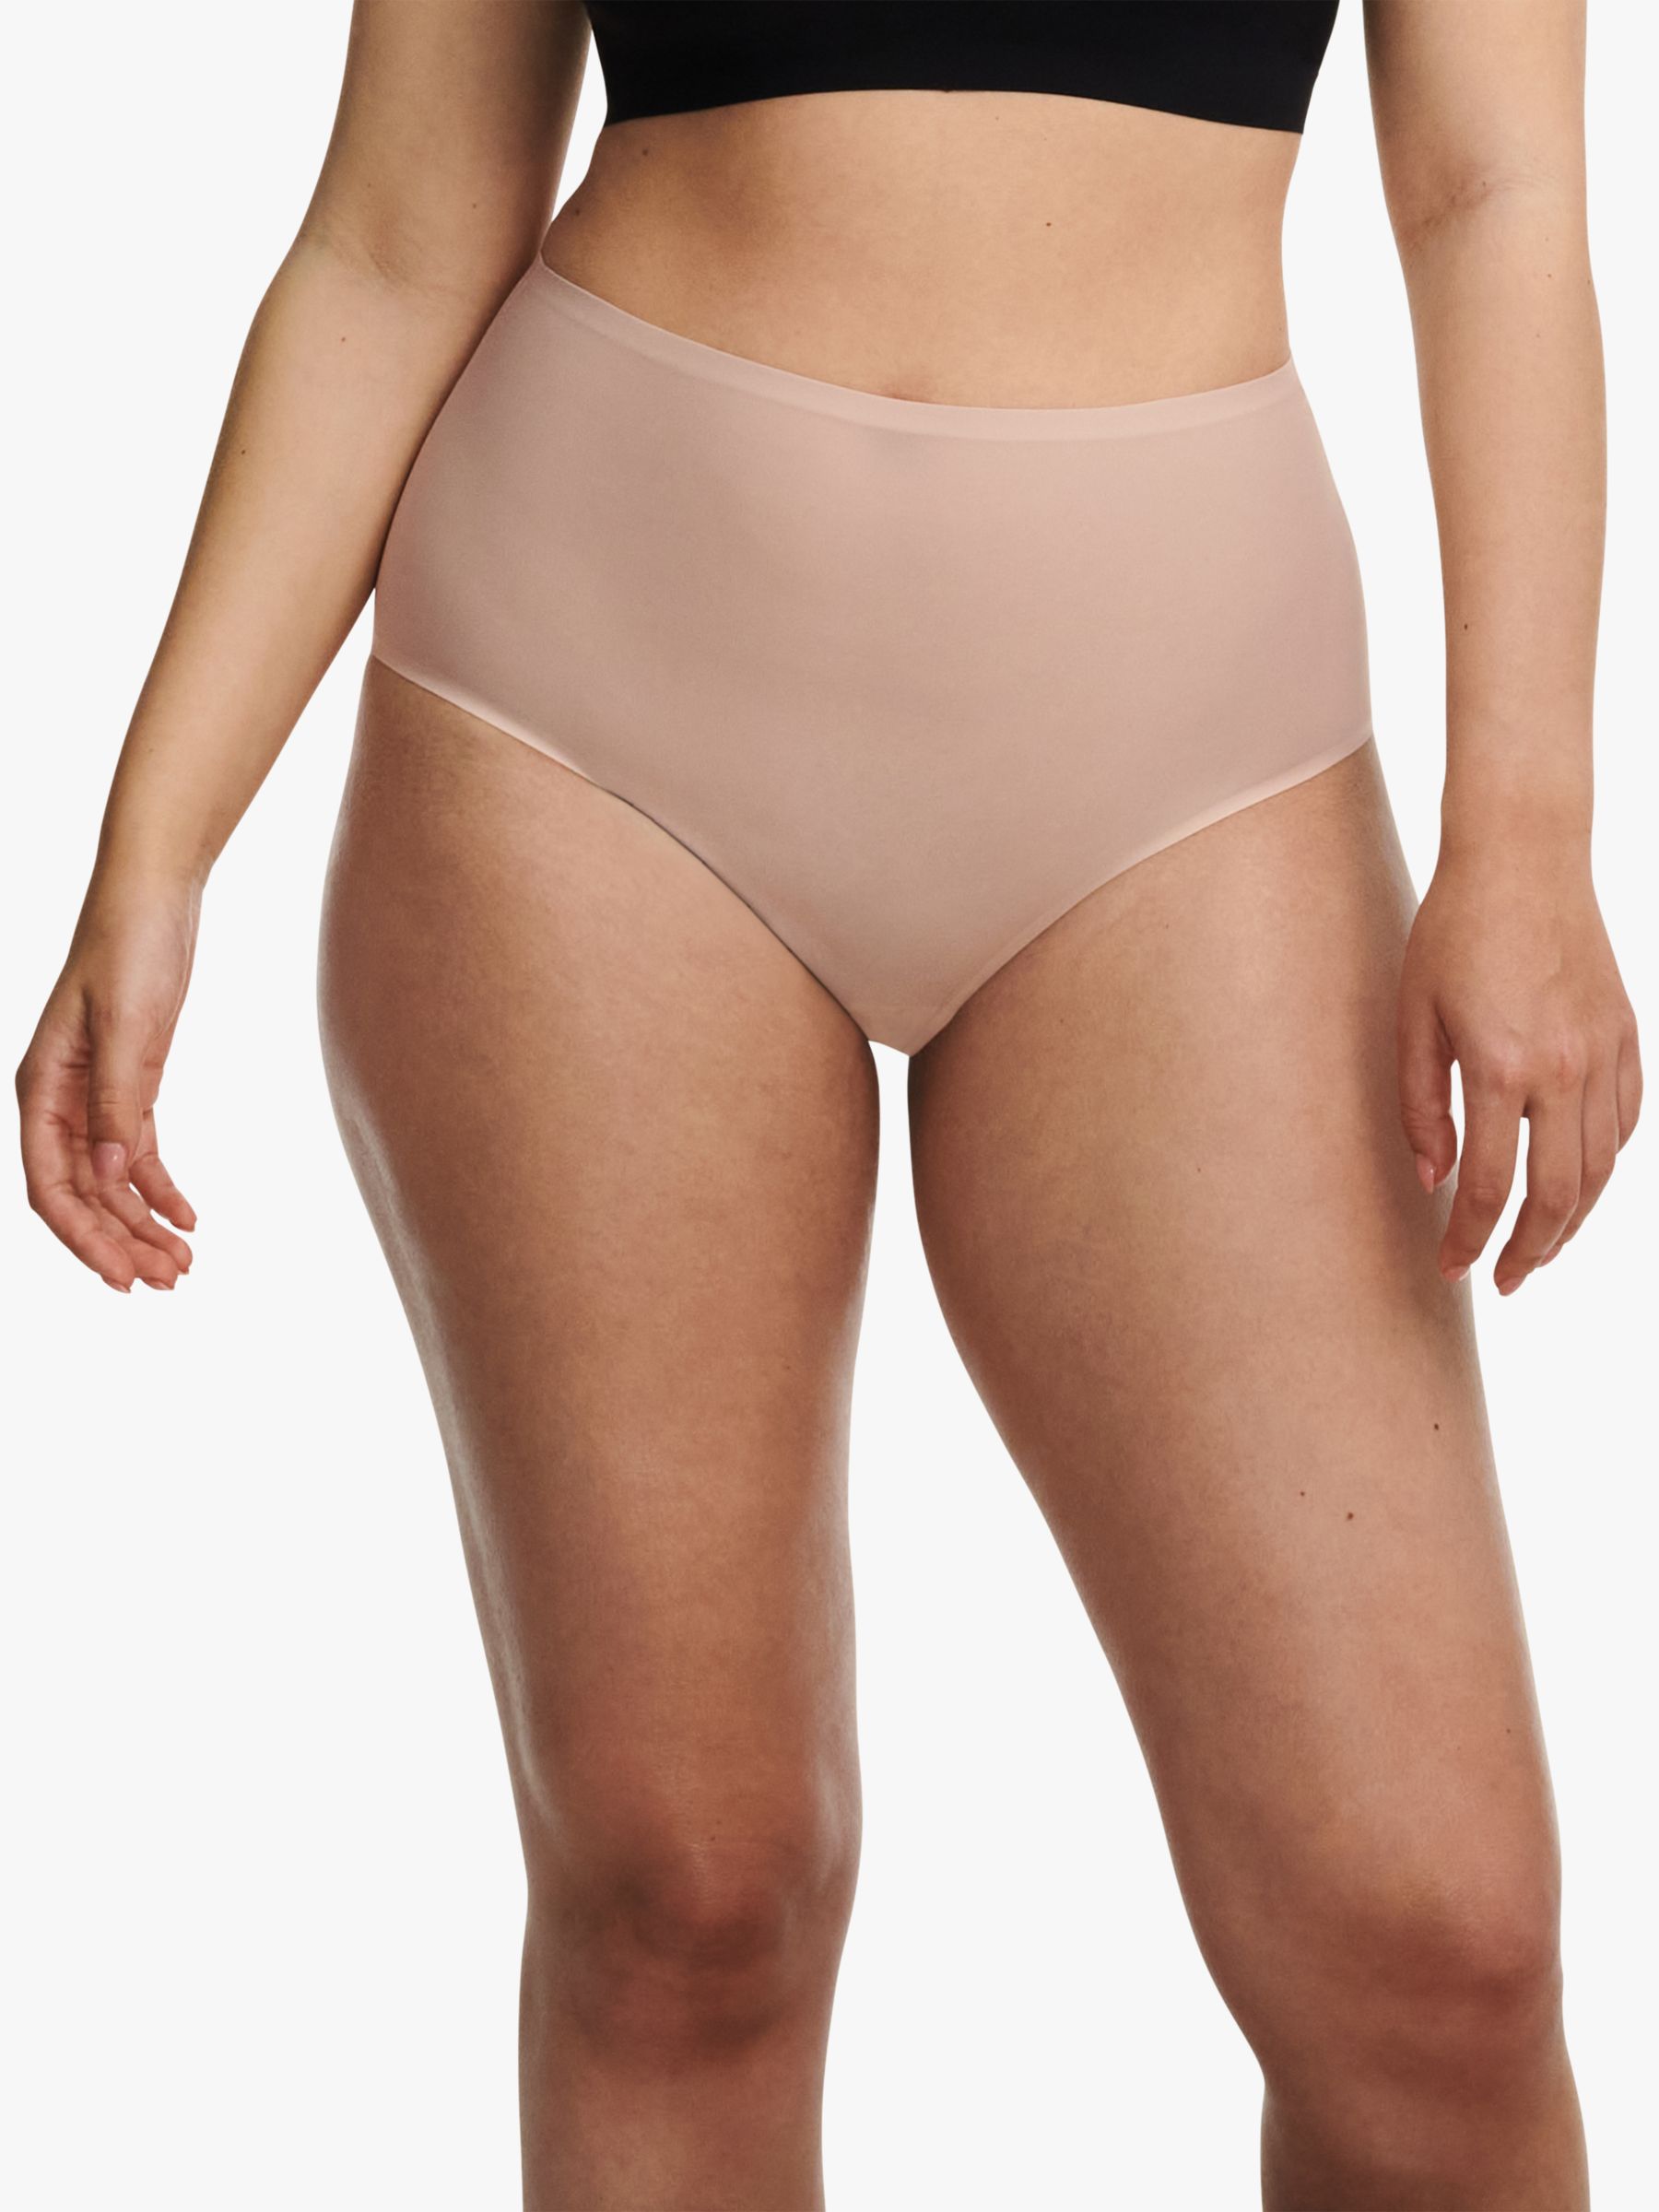 I Tried the Seamless Underwear Boasting a 'Second Skin'' Feel and